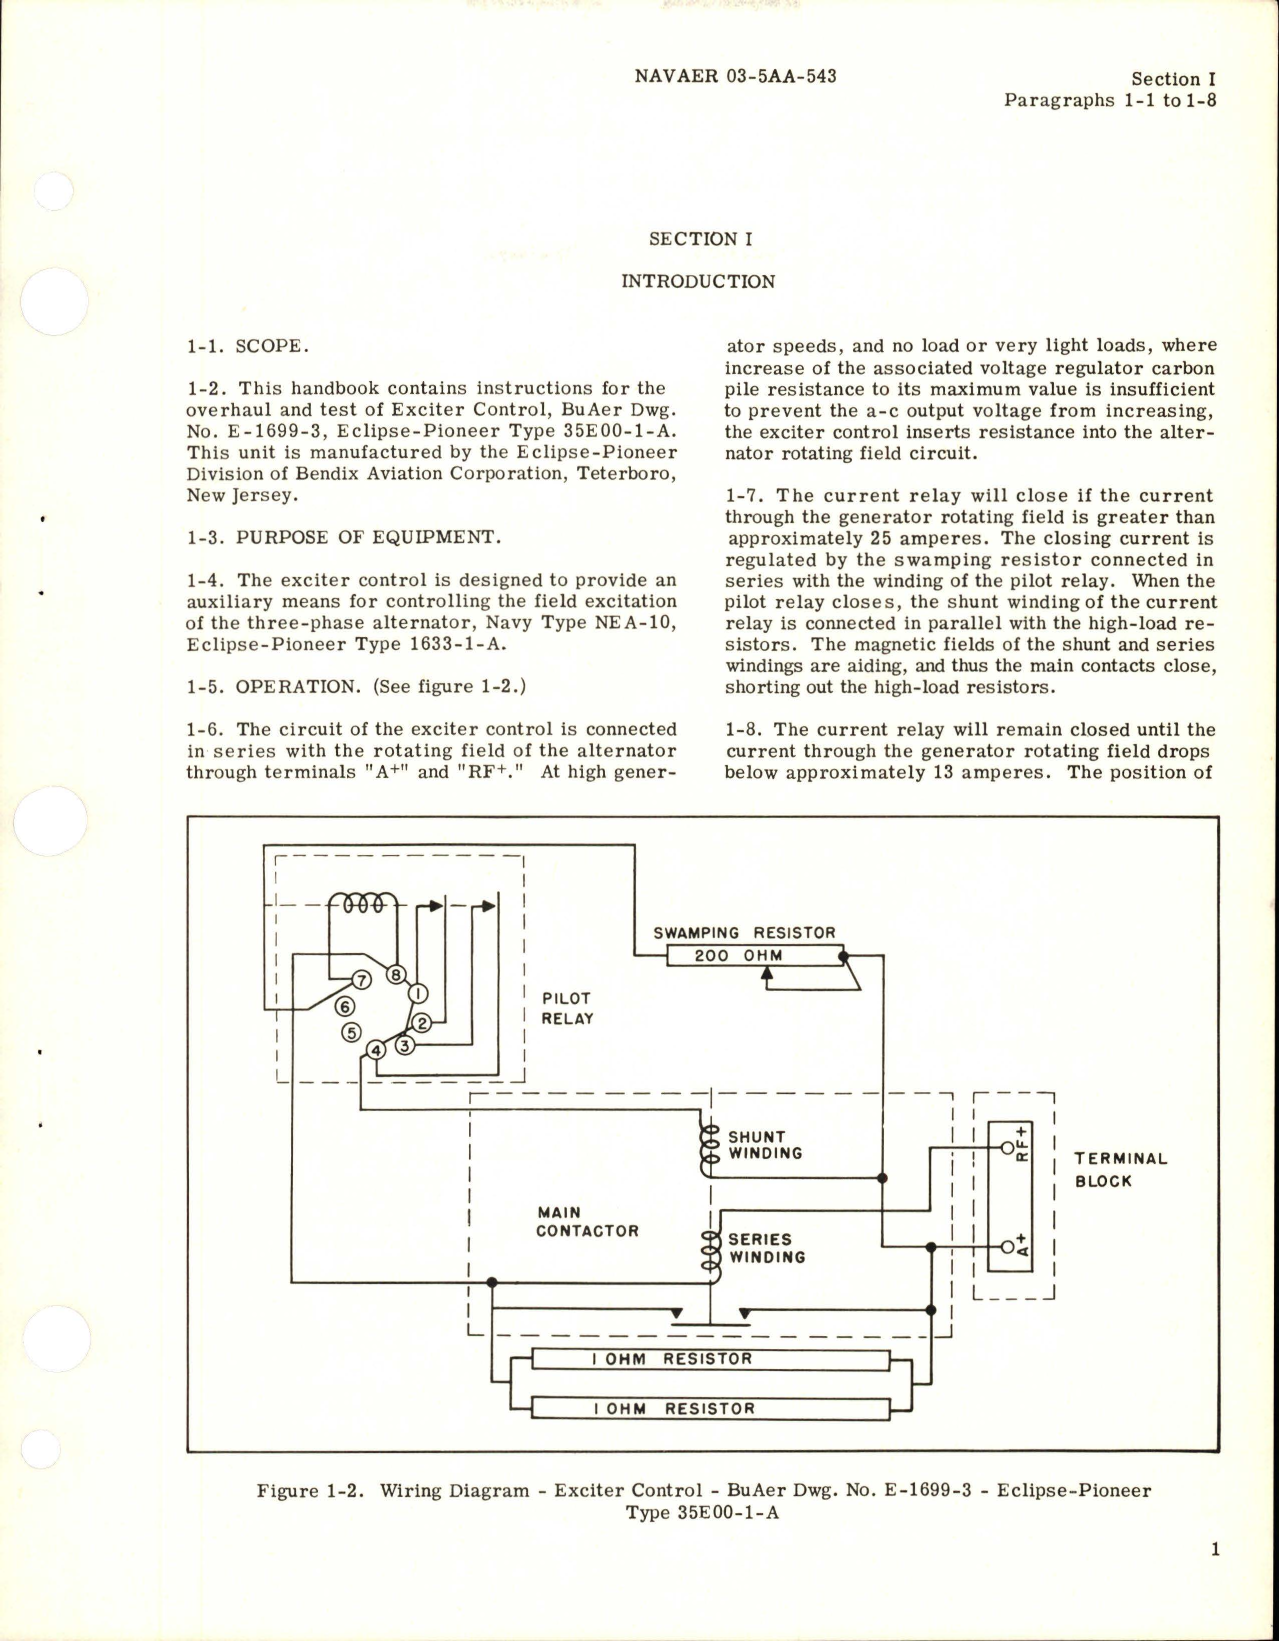 Sample page 5 from AirCorps Library document: Overhaul Instructions for Exciter Control - Part 35E00-1-A